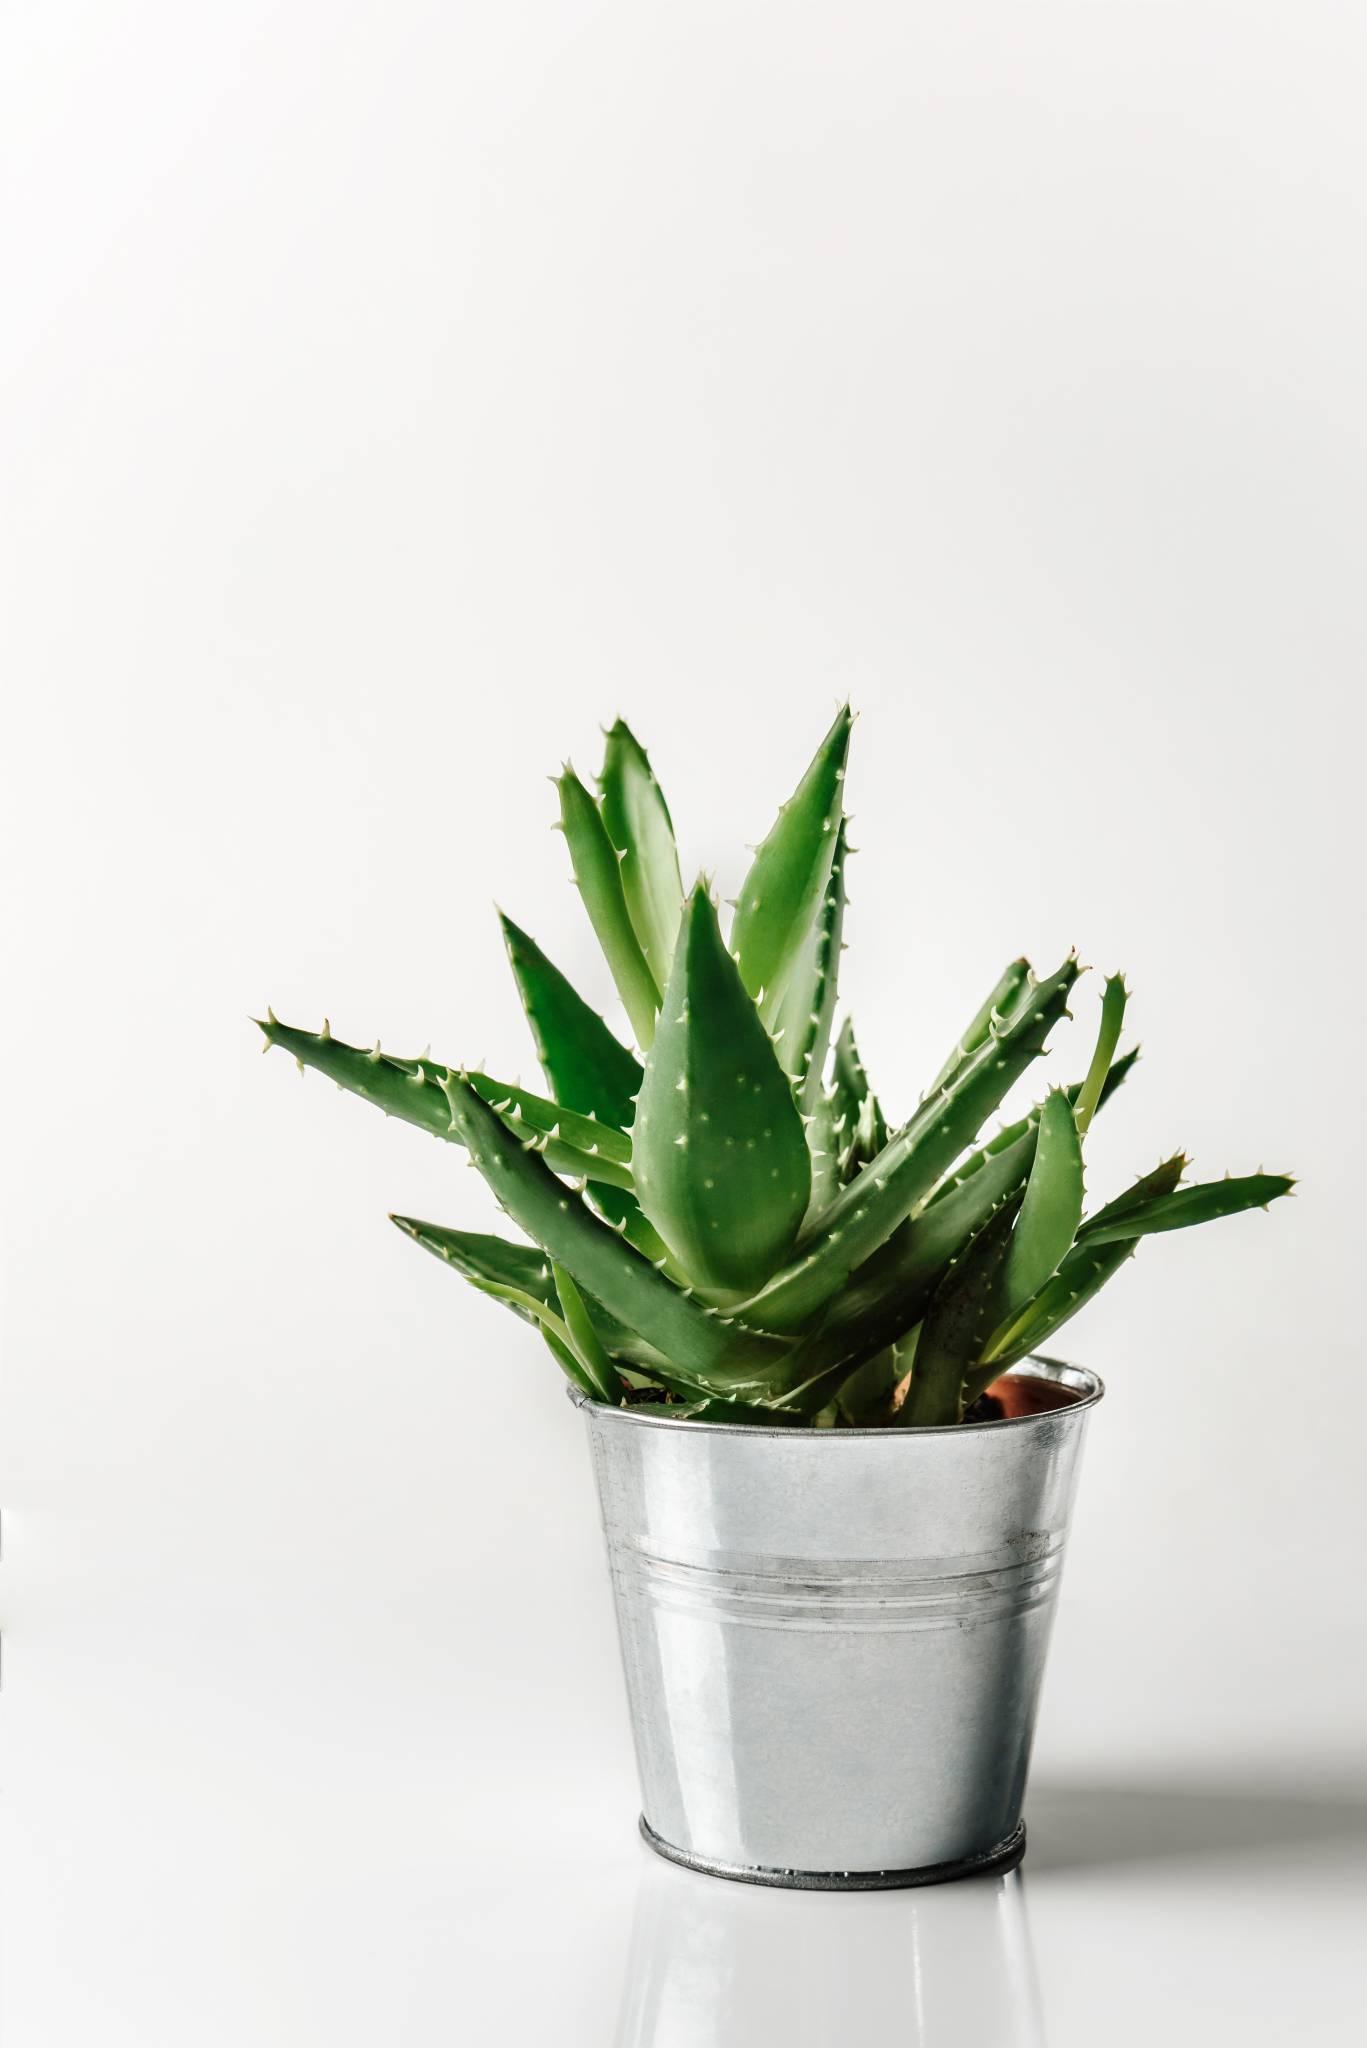  Aloes (fot. iStock)